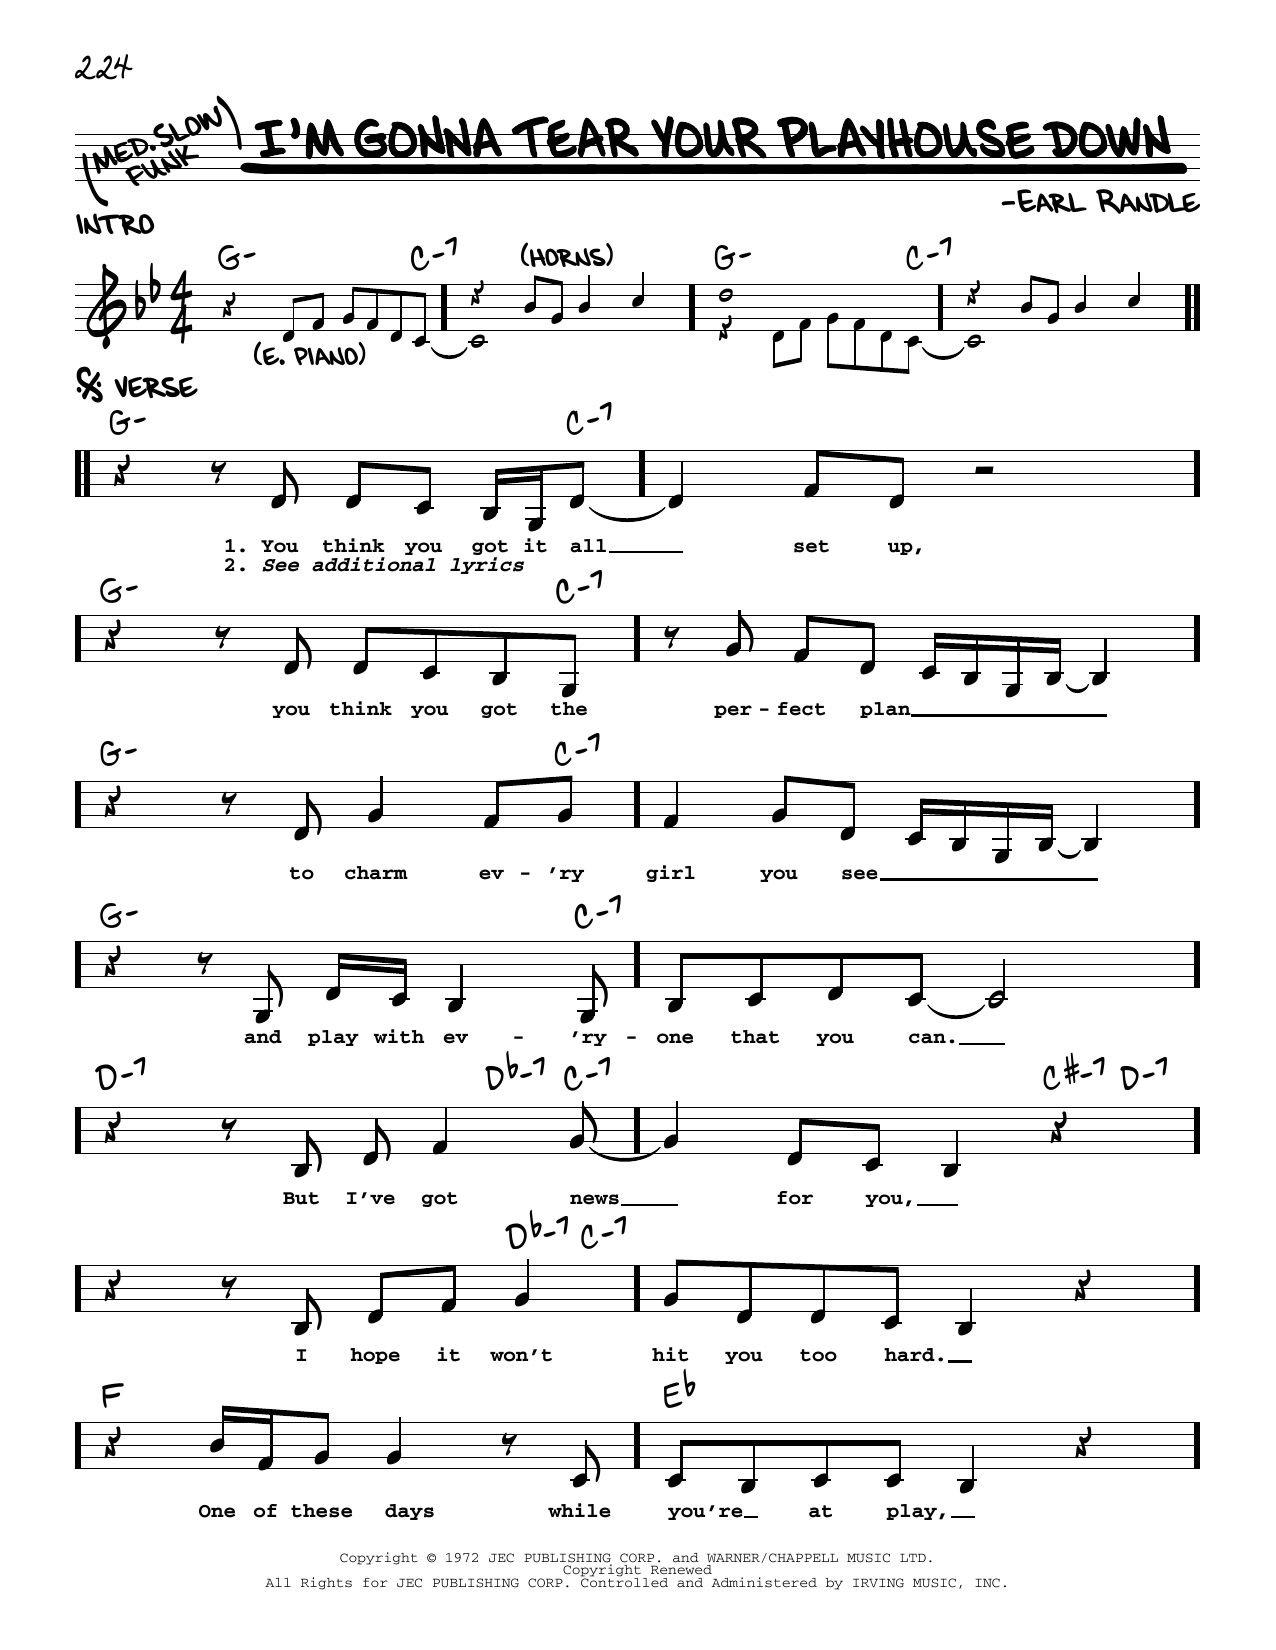 Download Earl Randle I'm Gonna Tear Your Playhouse Down Sheet Music